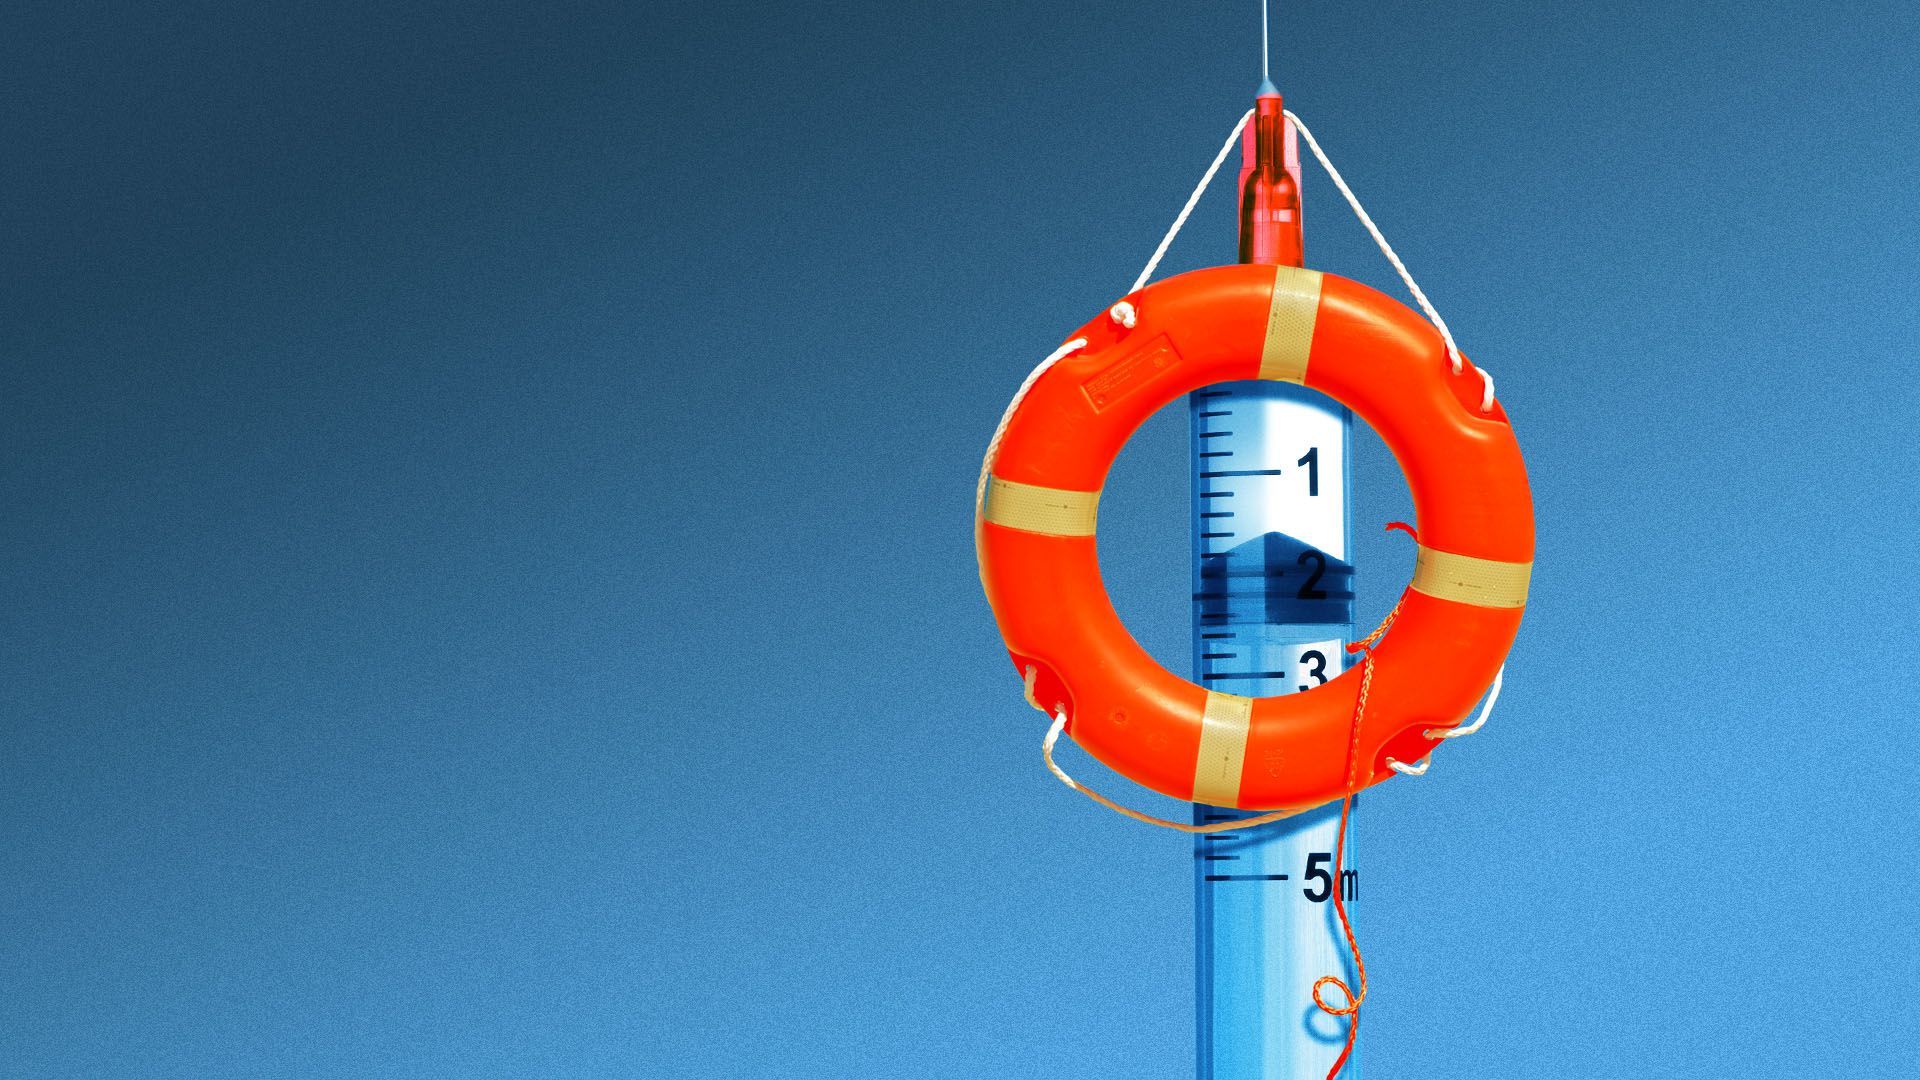 Illustration of a syringe supporting a life preserver ring